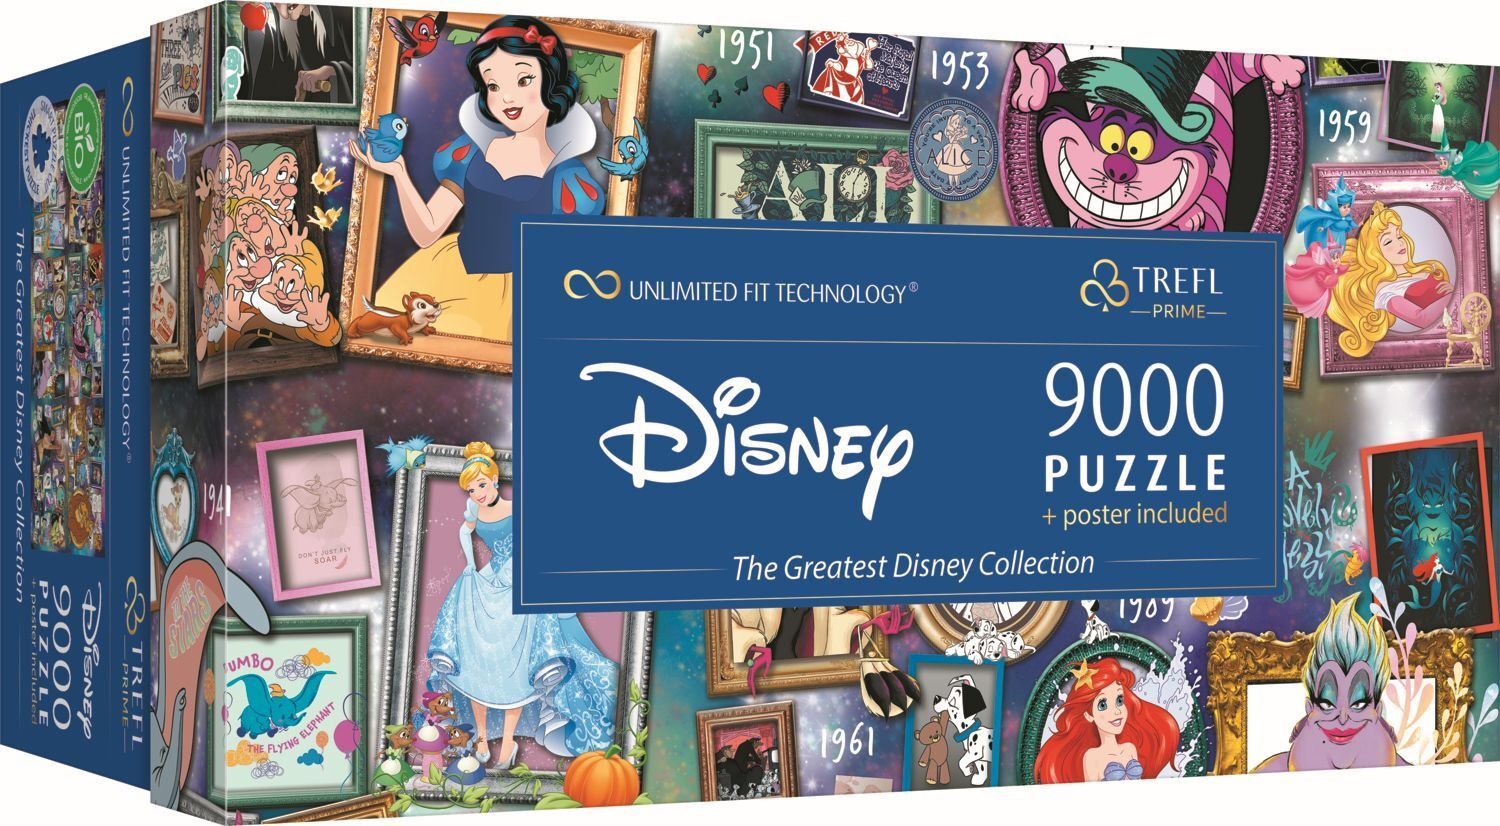 The Greatest Disney Collection